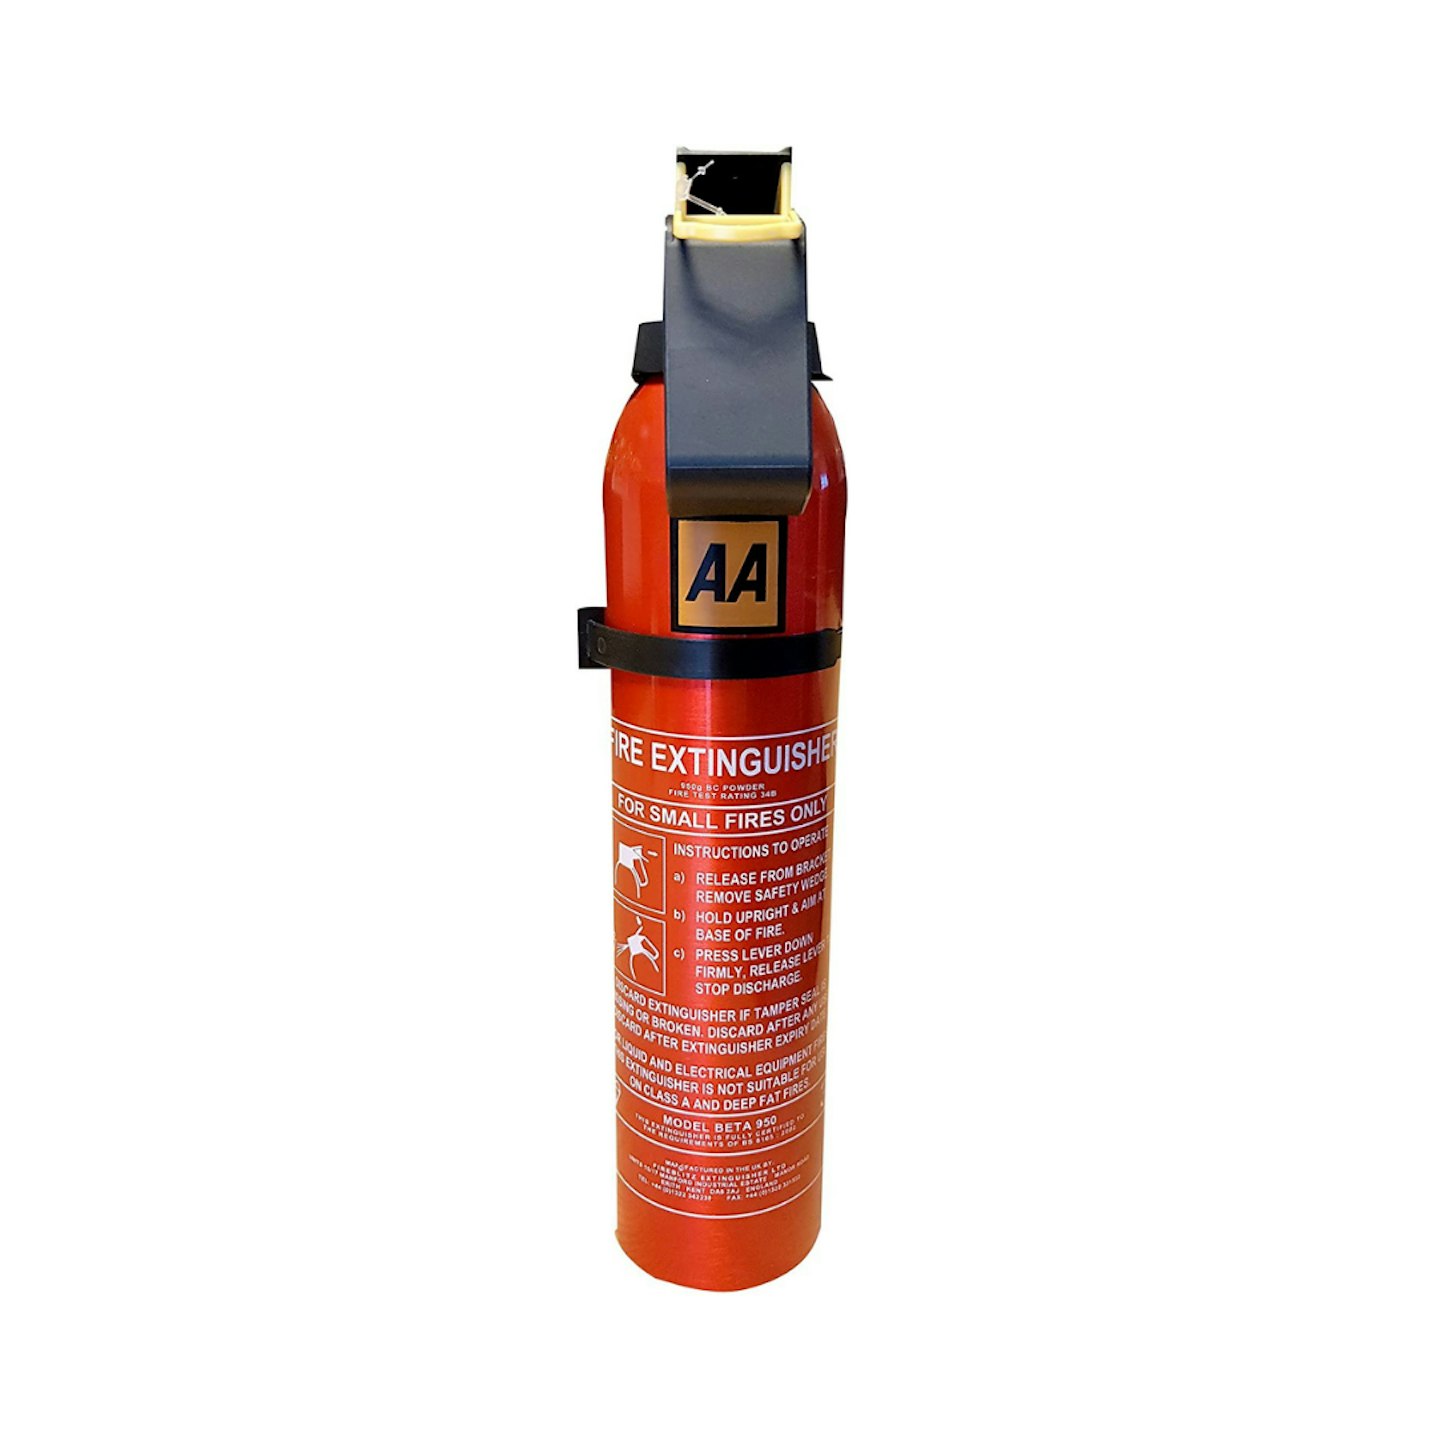 AA fire extinguisher for cars